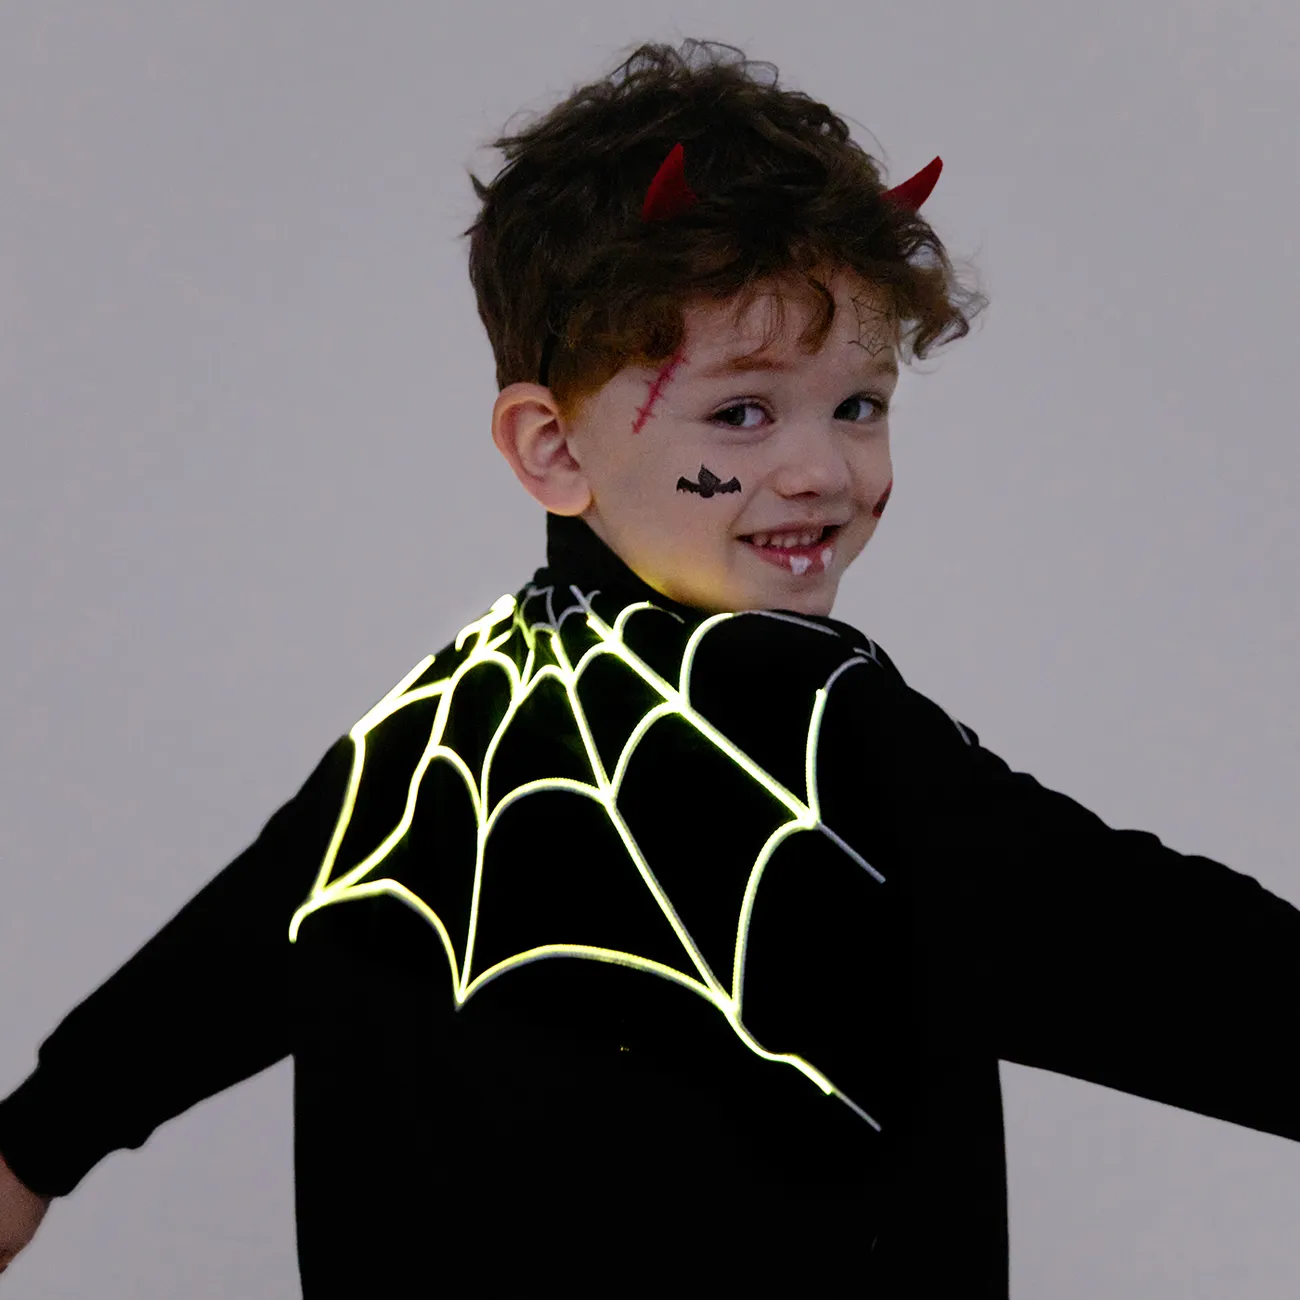 Go-Glow Illuminating Jacket with Light Up Embroidered Spider Web Including Controller (Built-In Battery) Black big image 1